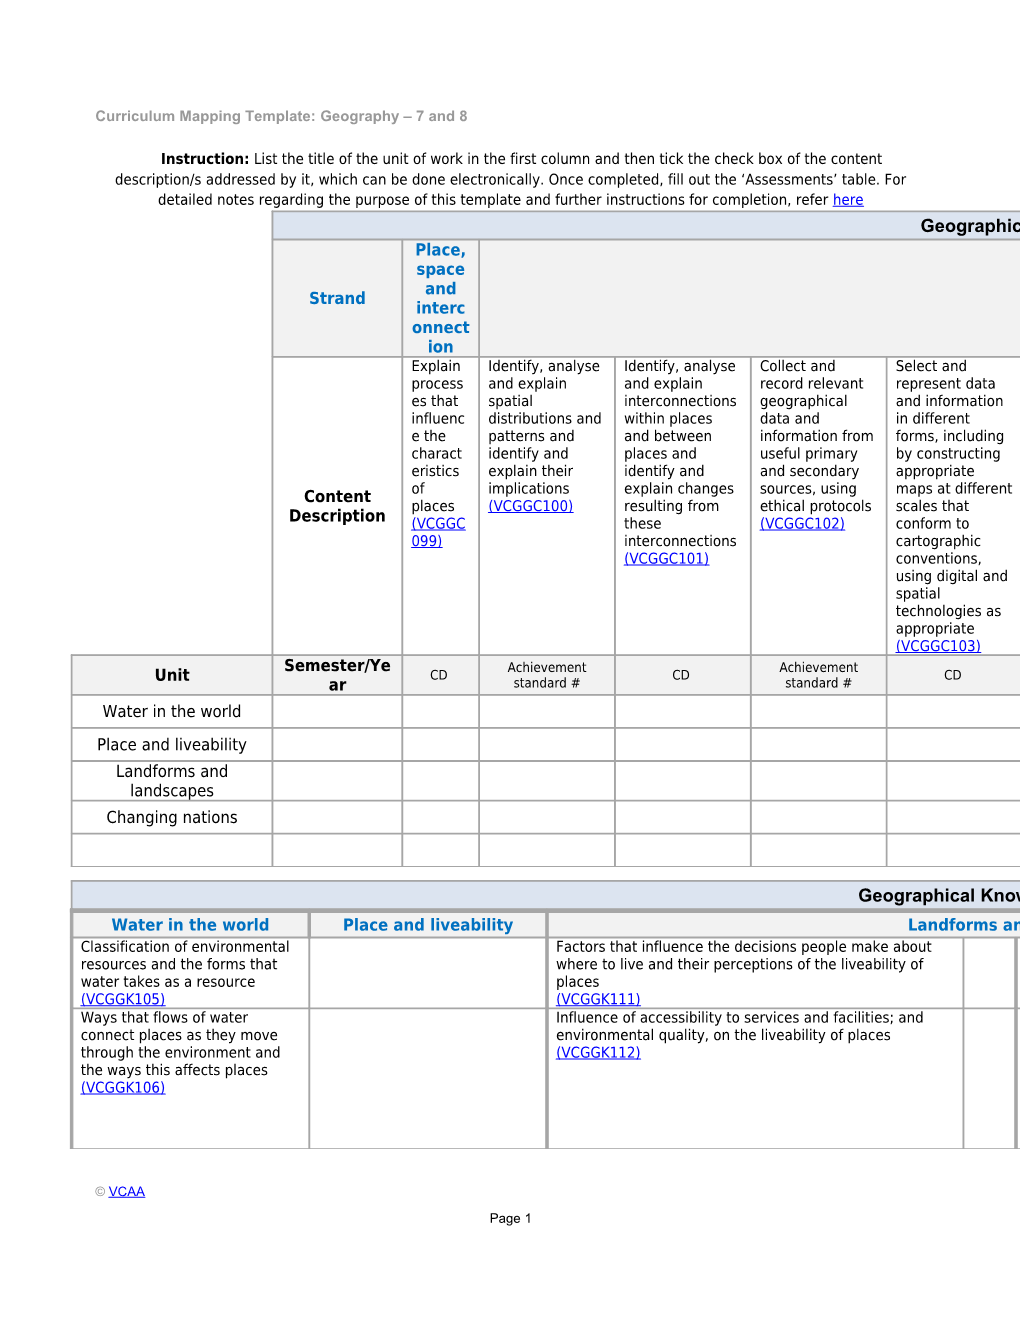 Curriculum Mapping Template: Geography 7 and 8